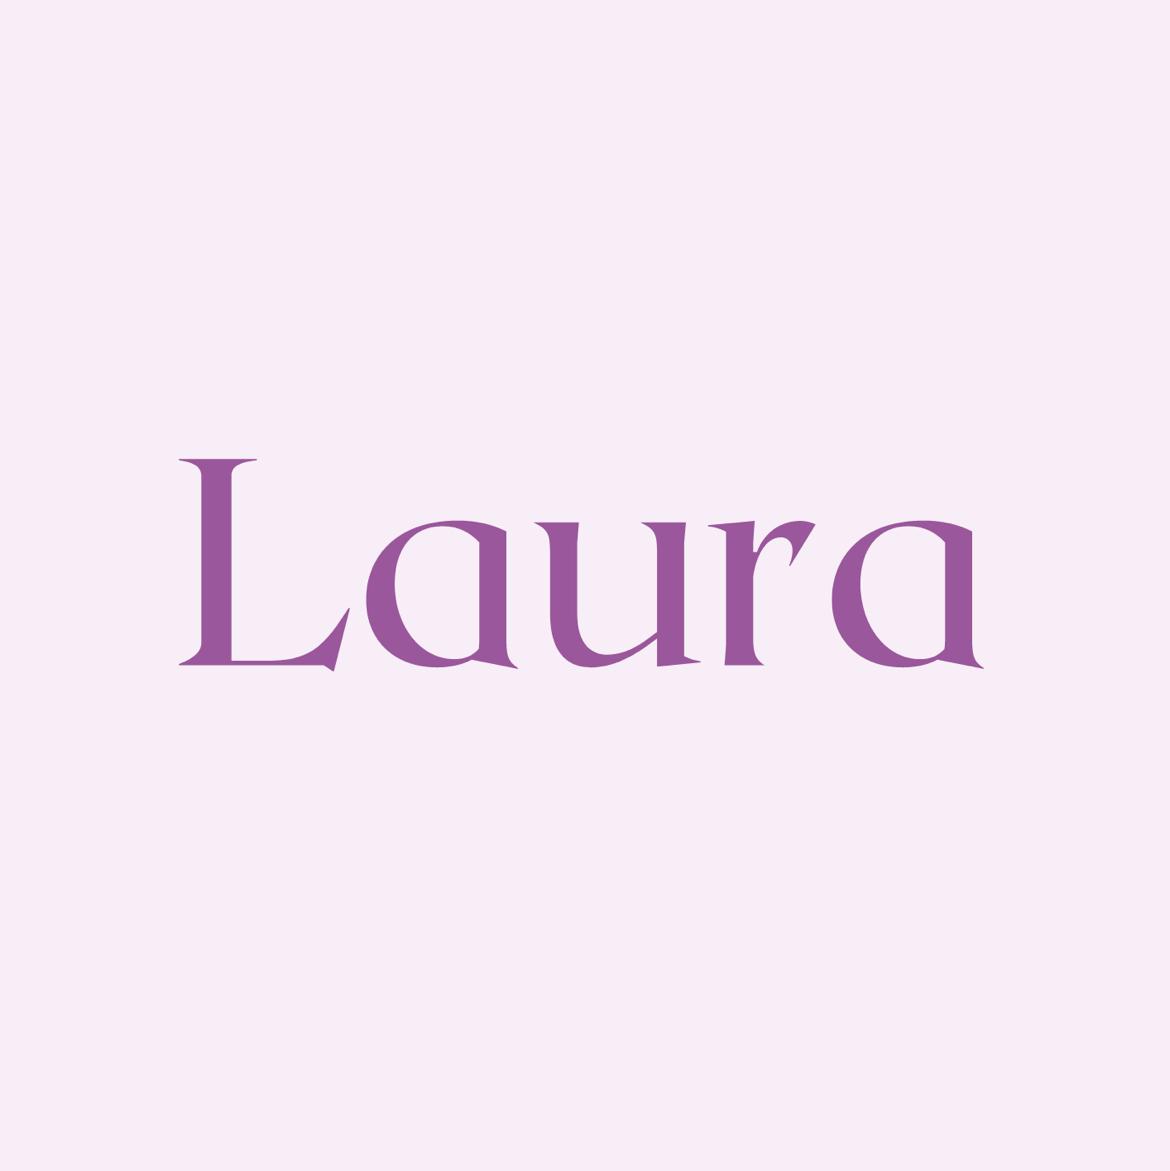 Laura's images